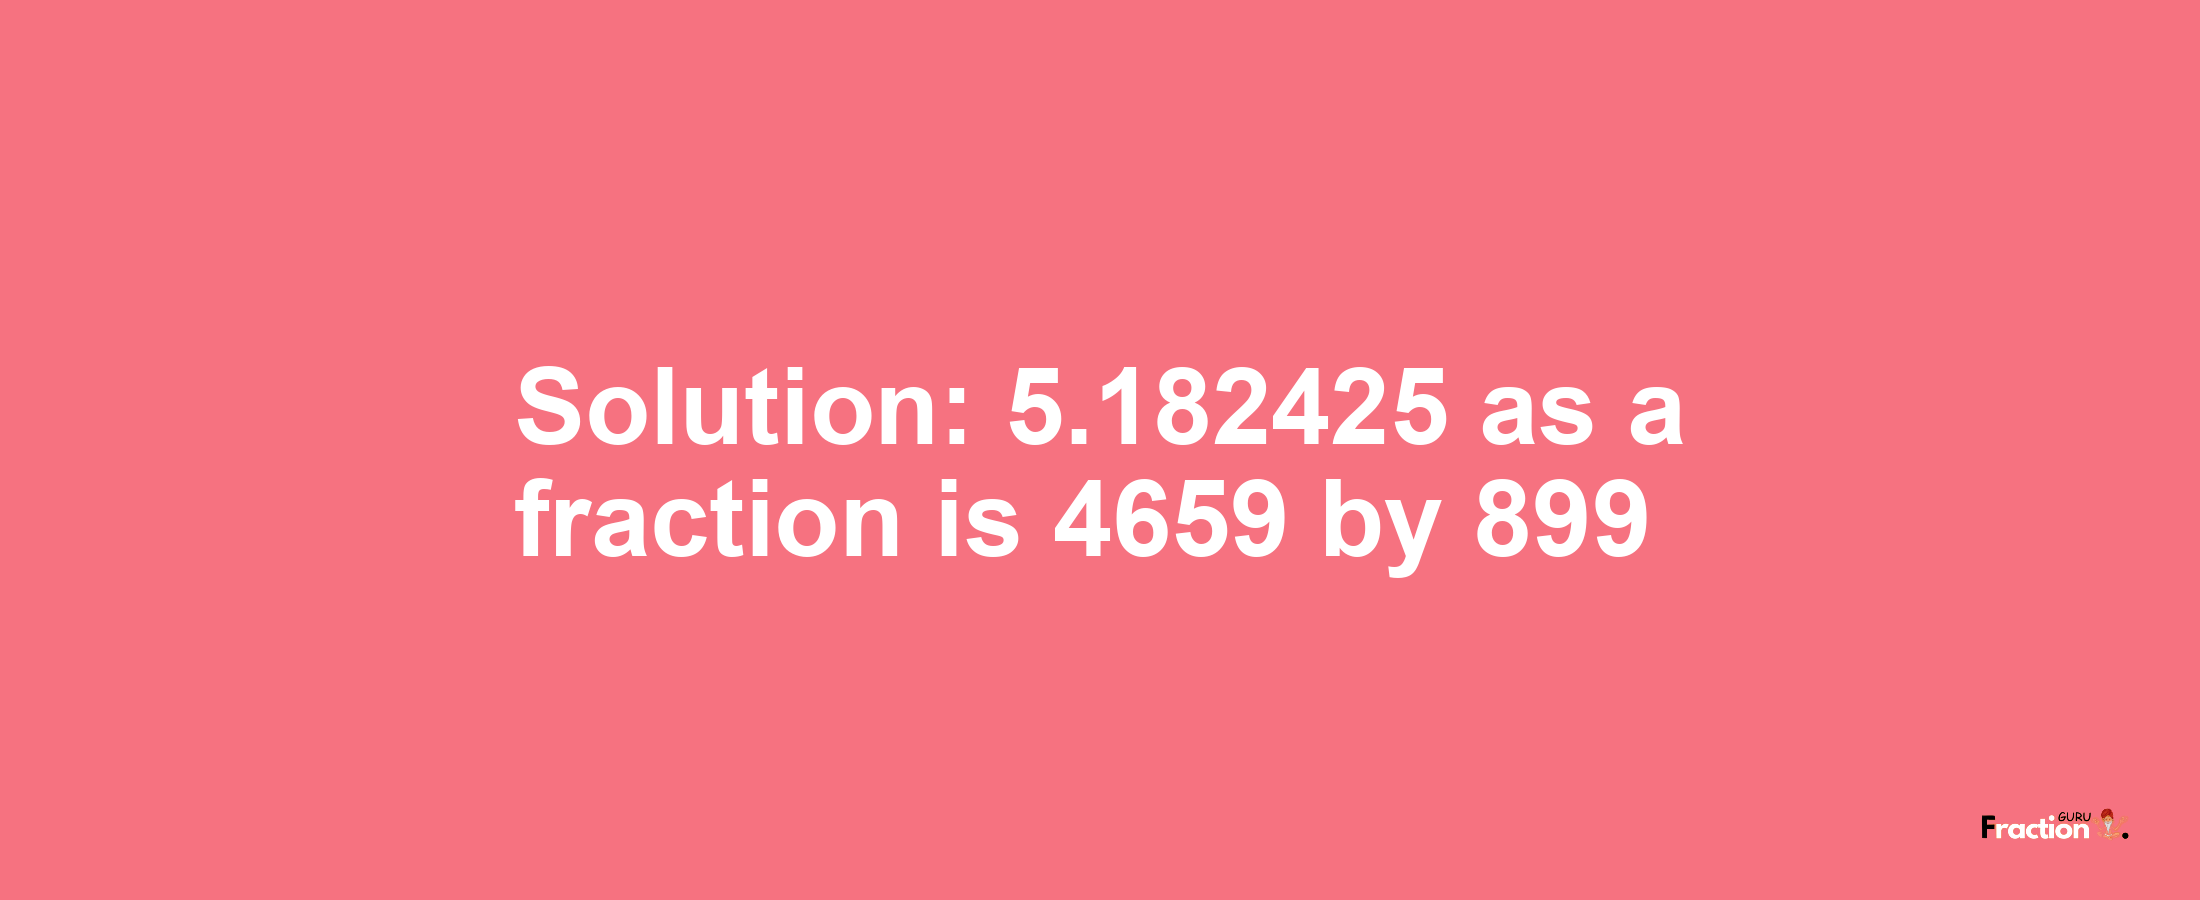 Solution:5.182425 as a fraction is 4659/899